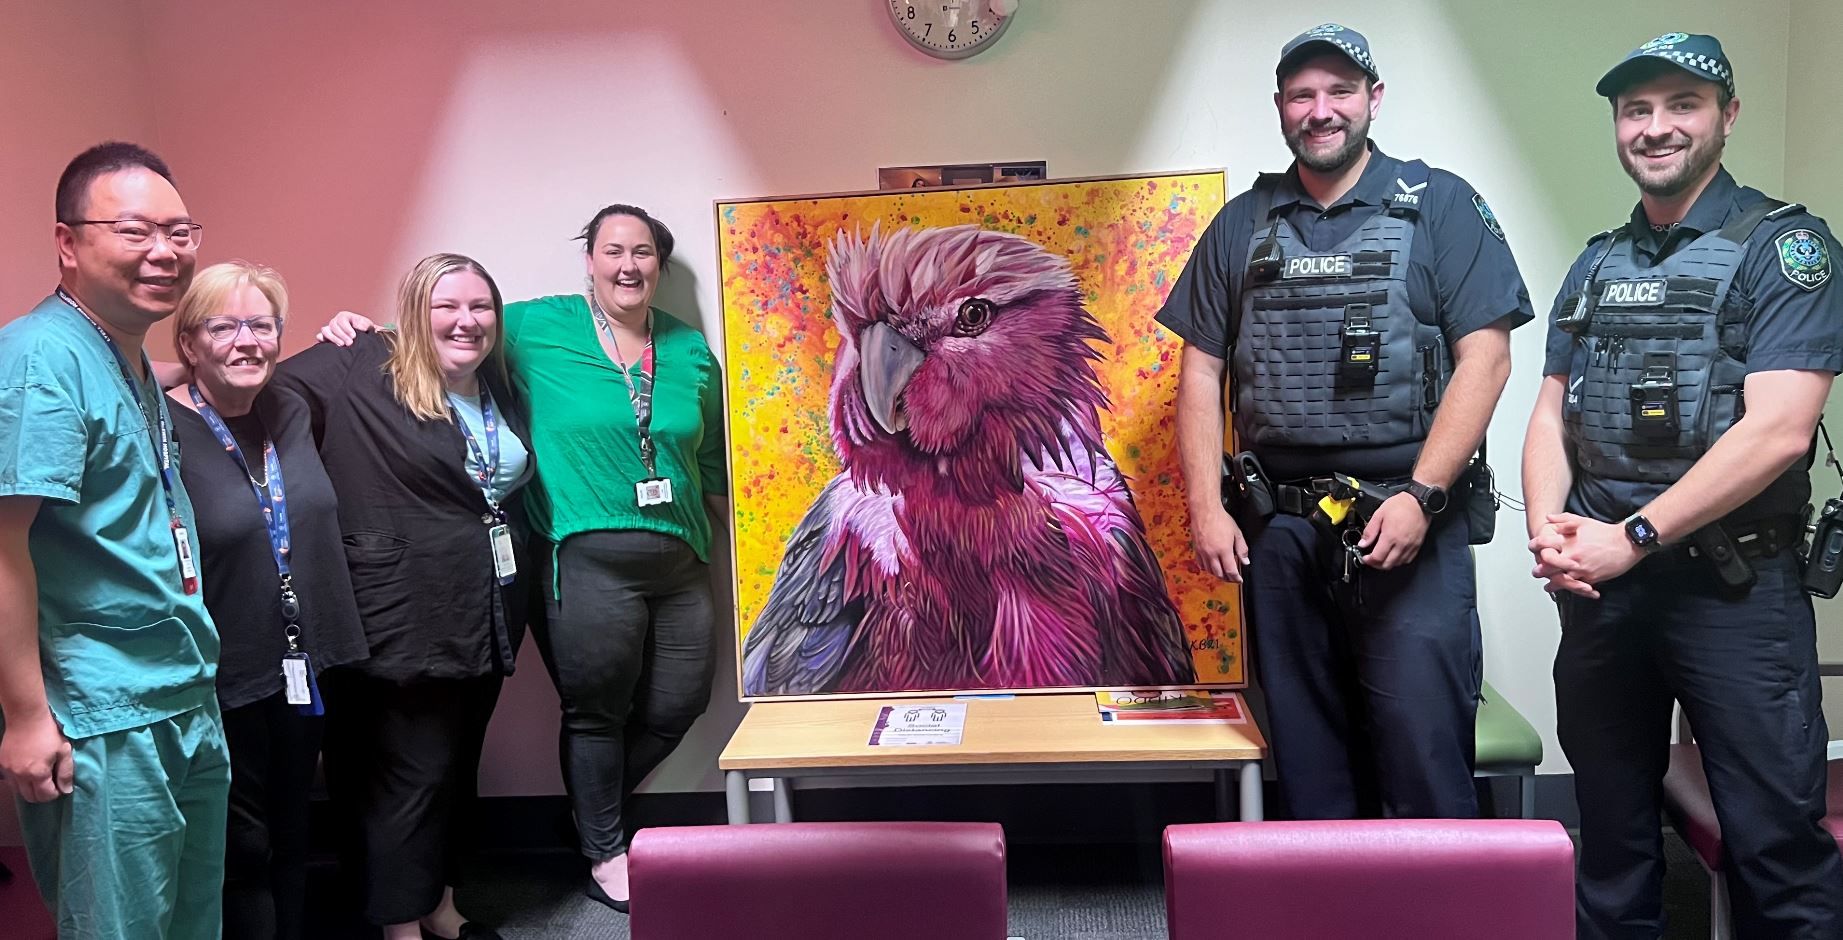 A group of medical staff and police smiling next to a galah painting.